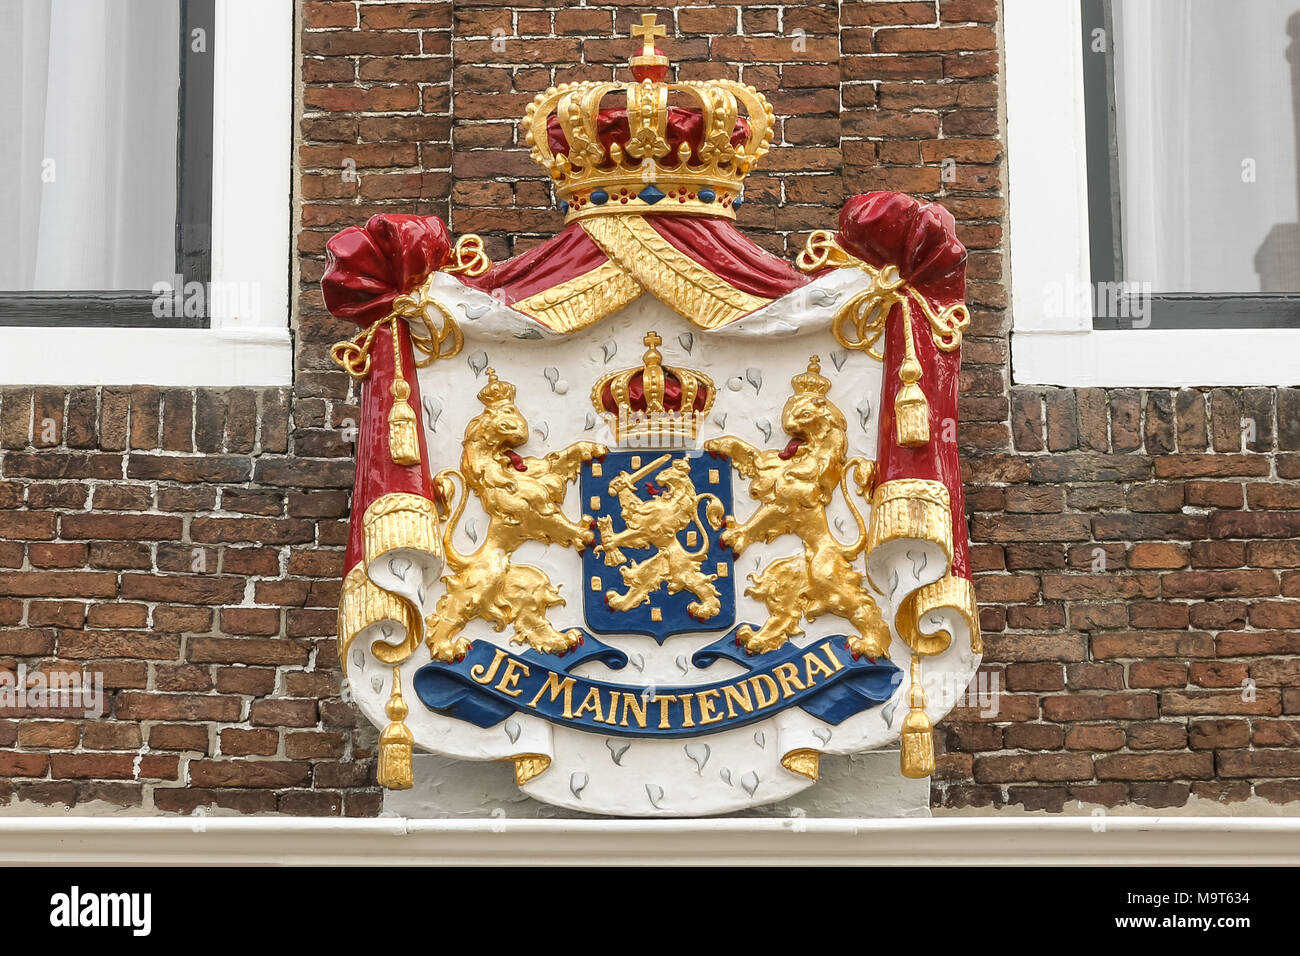 Coat of Arms with the motto Je Maintiendrai (I will hold) of the Dutch Royal Family on an old building in Zierikzee, the Netherlands. Photo taken on M Stock Photo